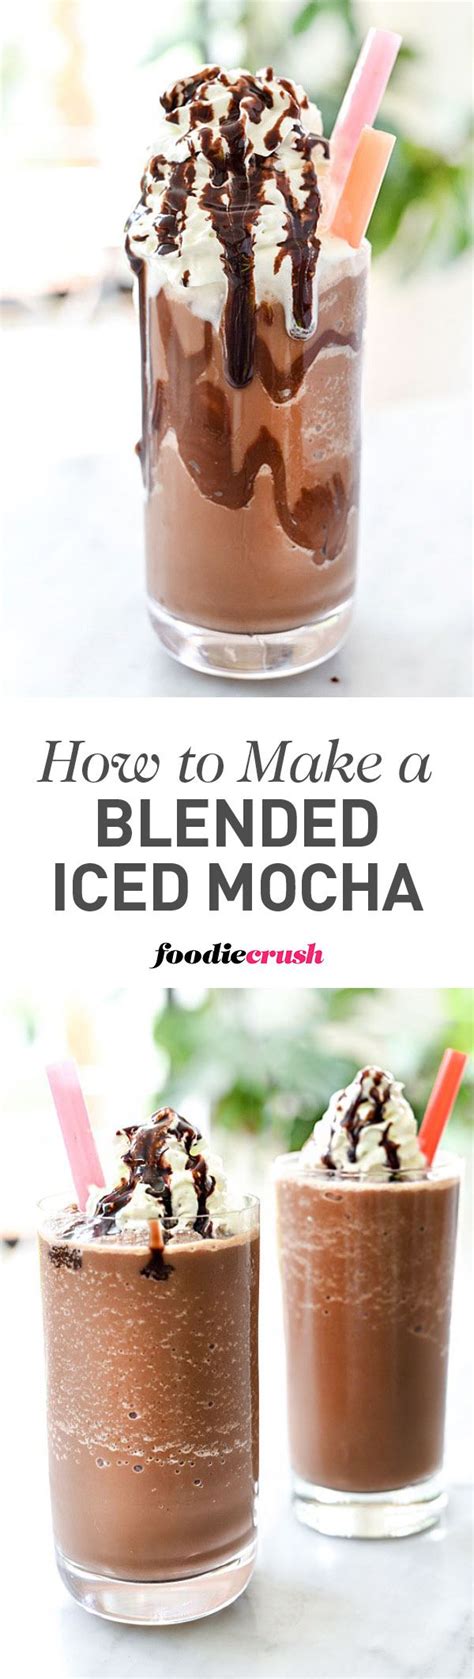 This Homemade Version Of Everyones Favorite Blended Coffee Drink With